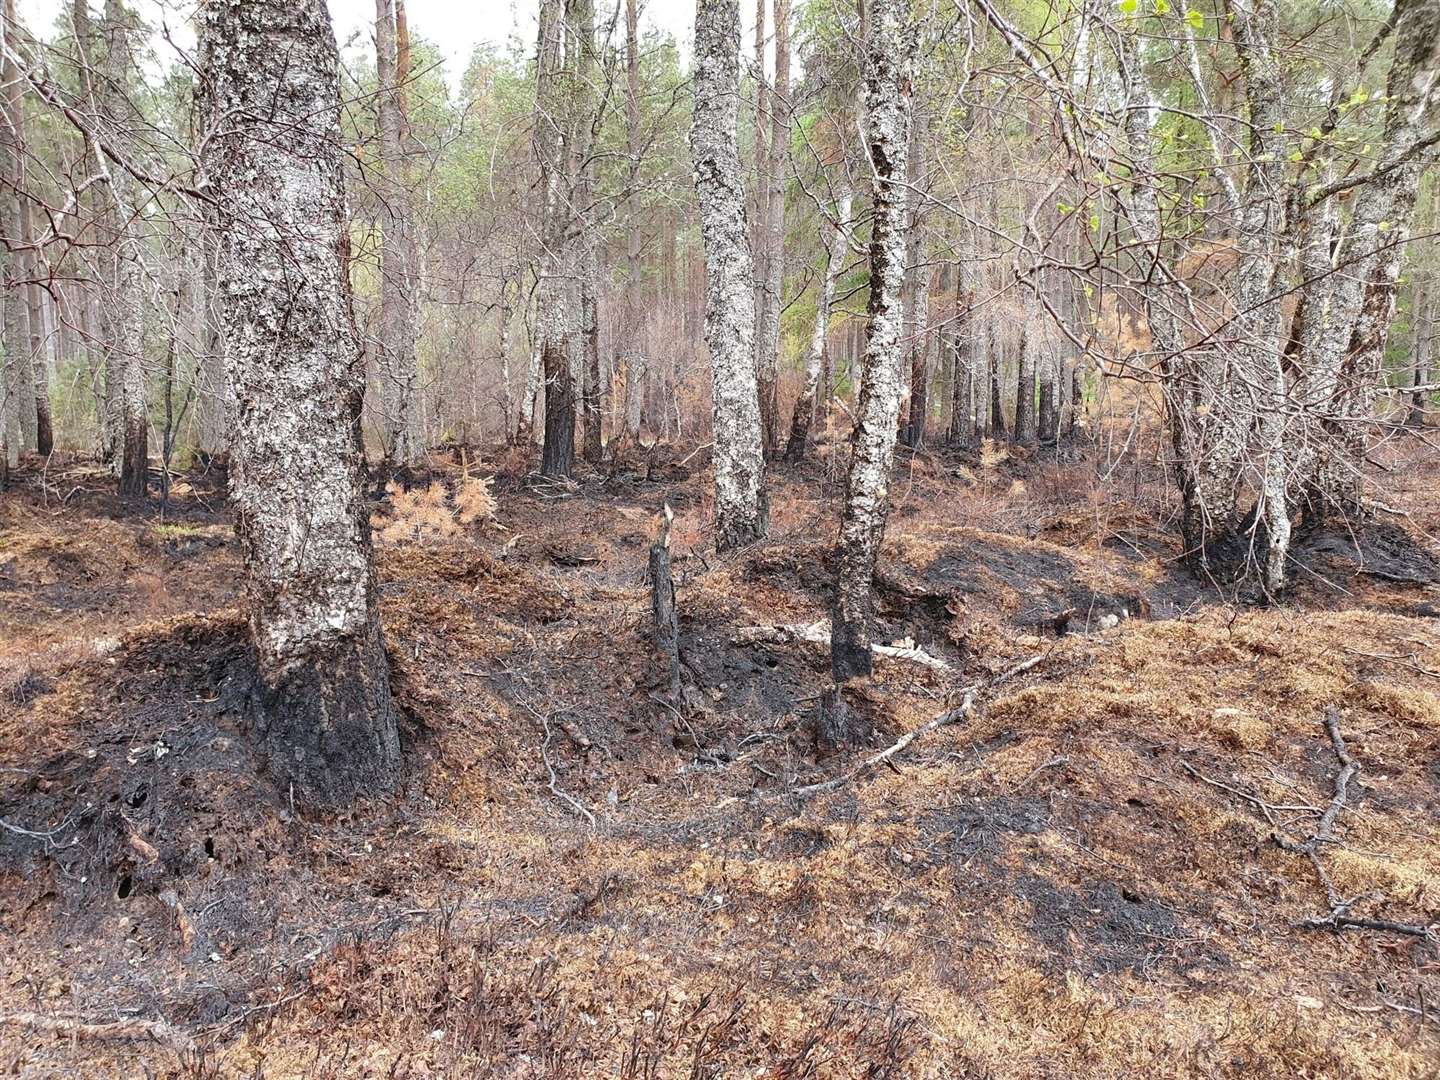 Trees scorched by fire in the Cairngorms National Park. Picture: Vicky Hilton.